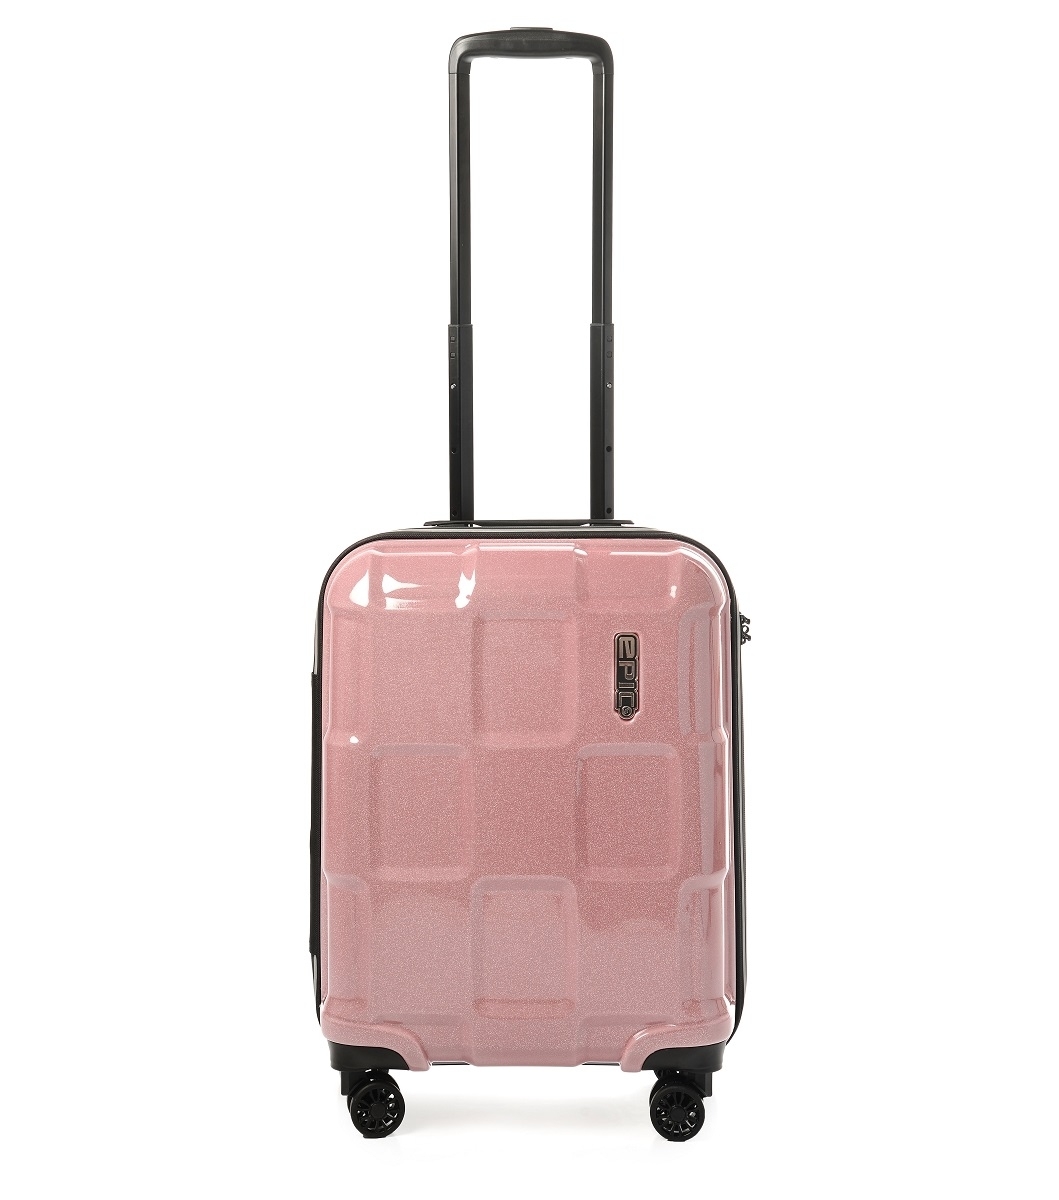 Image of Crate Reflex - 4 Rollen Trolley 55 cm in Crystal Rose